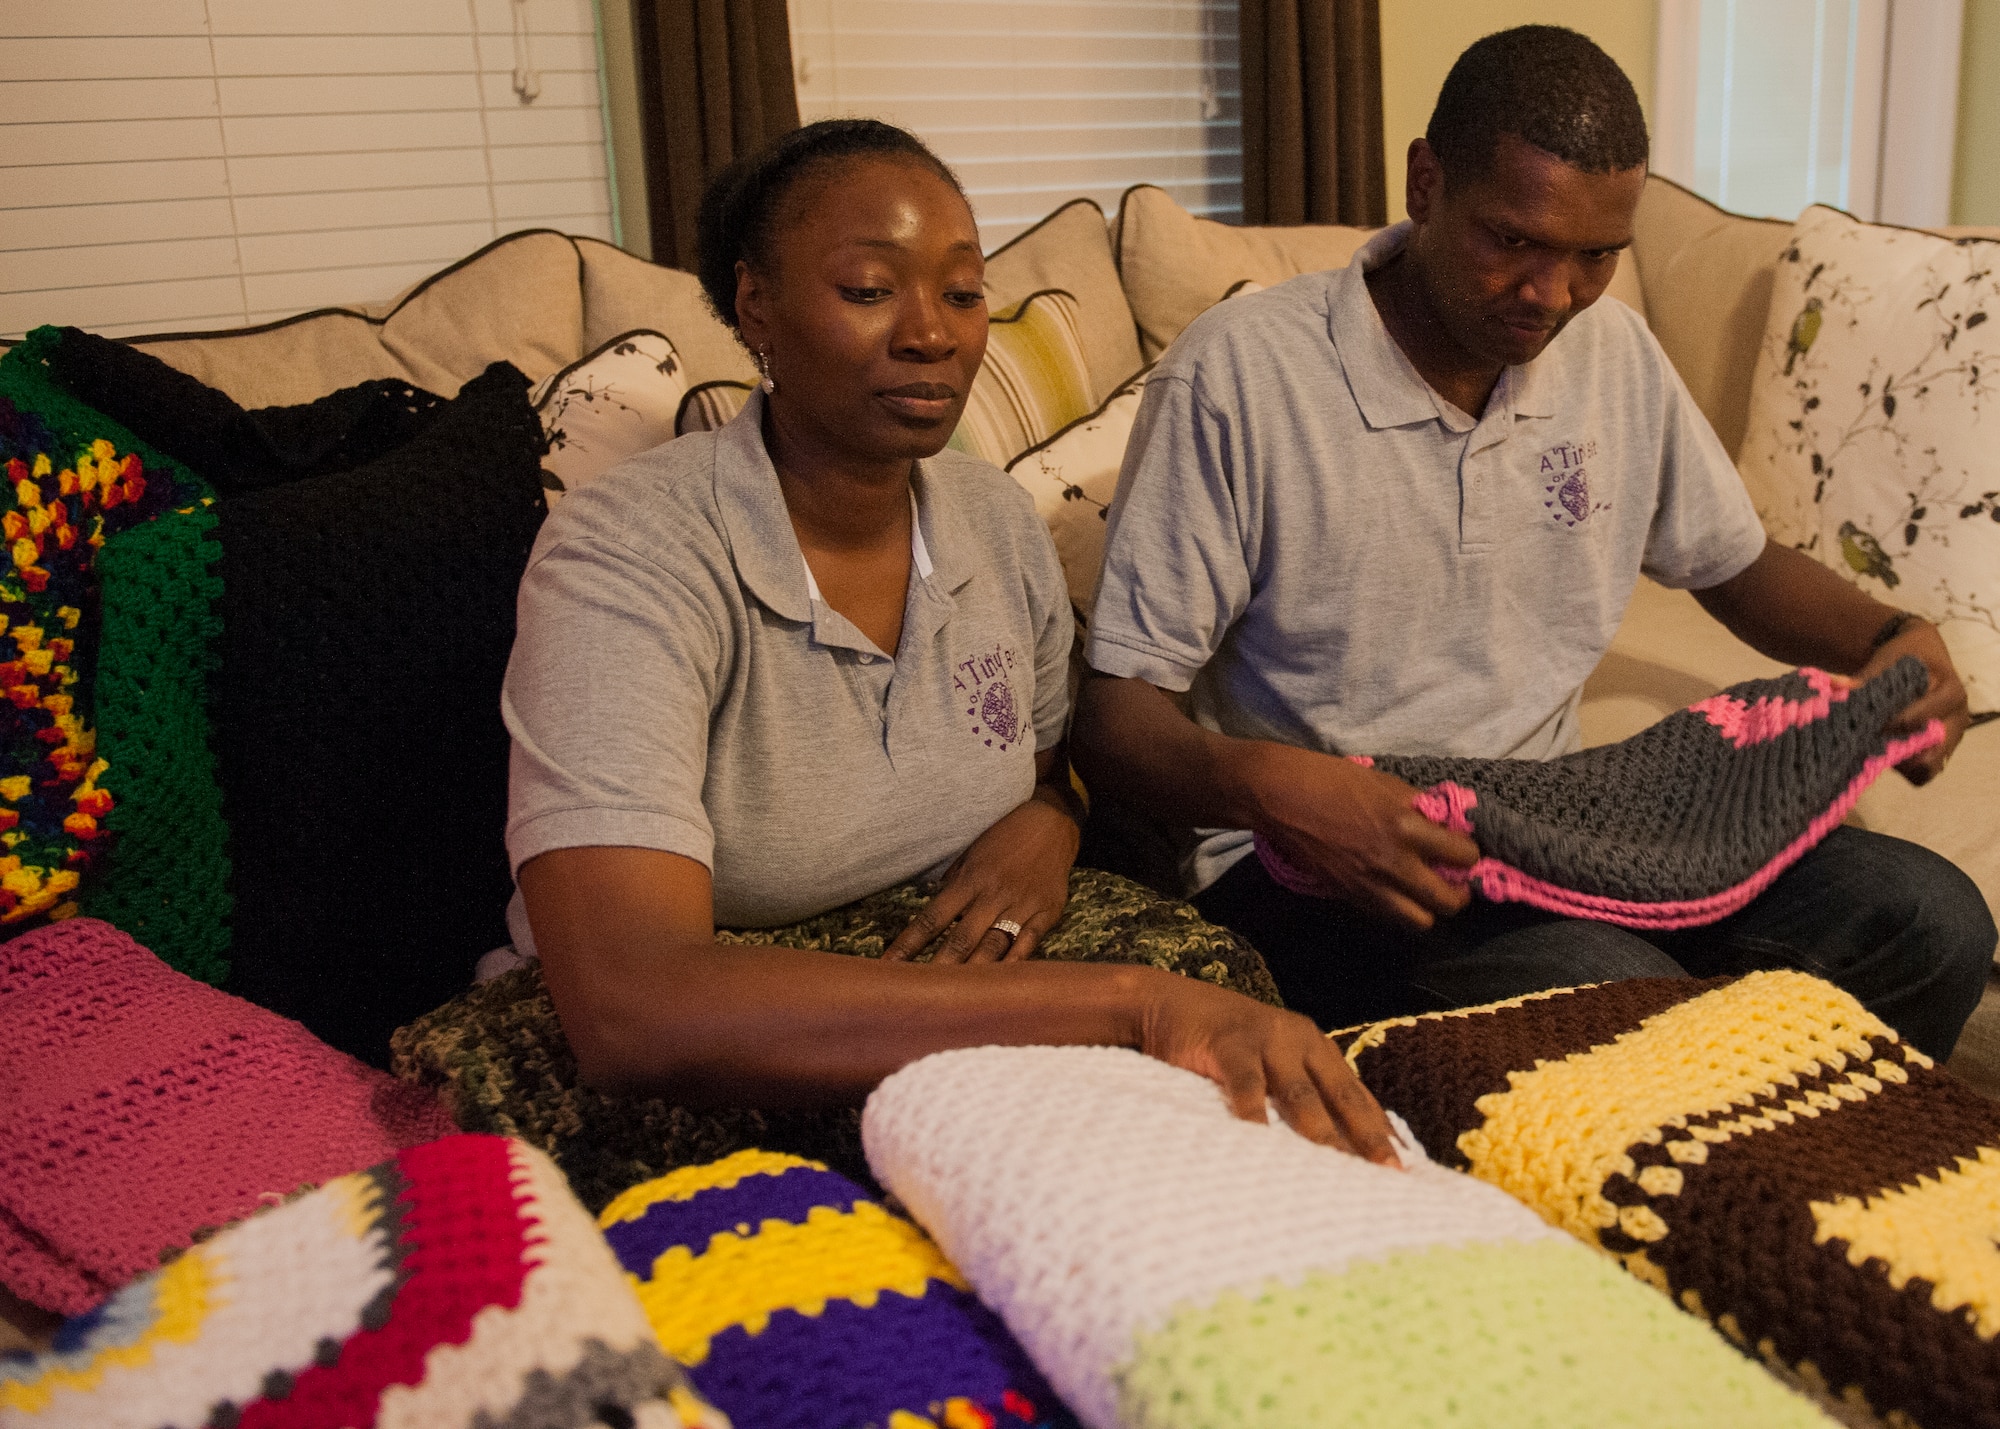 Tech. Sgt. Antonio Ruth, 33rd Fighter Wing and his wife, Master Sgt. Candace Ruth, 53rd Wing, take inventory of the blankets crocheted by Ruth June 10 near Eglin Air Force Base, Fla. Ruth formed an organization to honor his late mother, and  to continue her  legacy of caring and giving.  A “Tiny” Bit of Love provides handmade blankets to cancer patients. (U.S. Air Force photo/Ilka Cole)